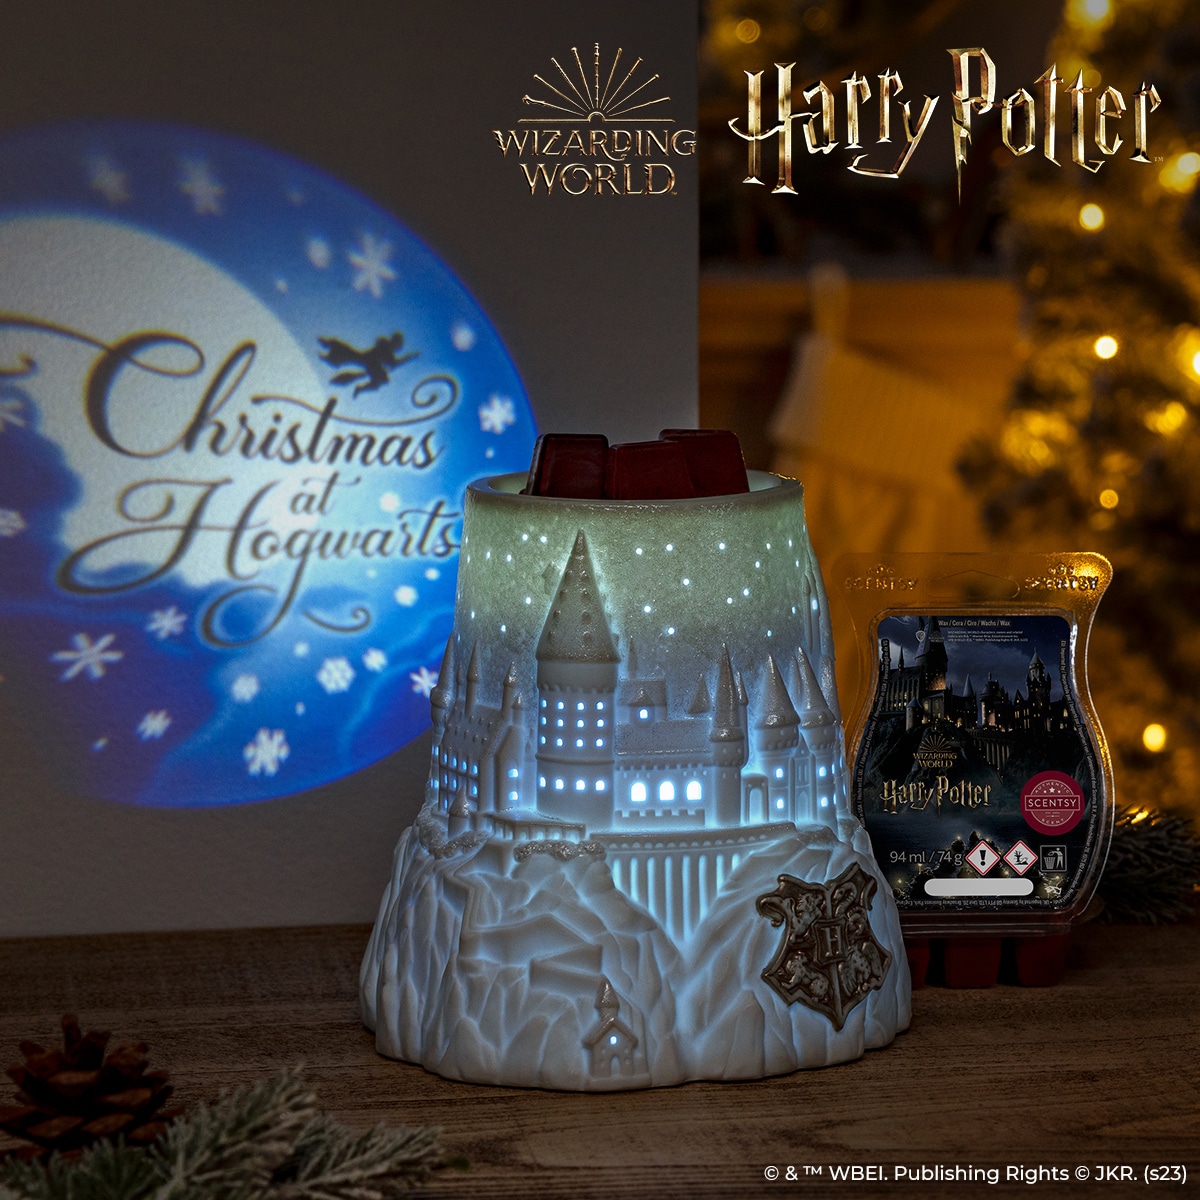 Exciting New Harry Potter Scentsy Warmer Coming Soon